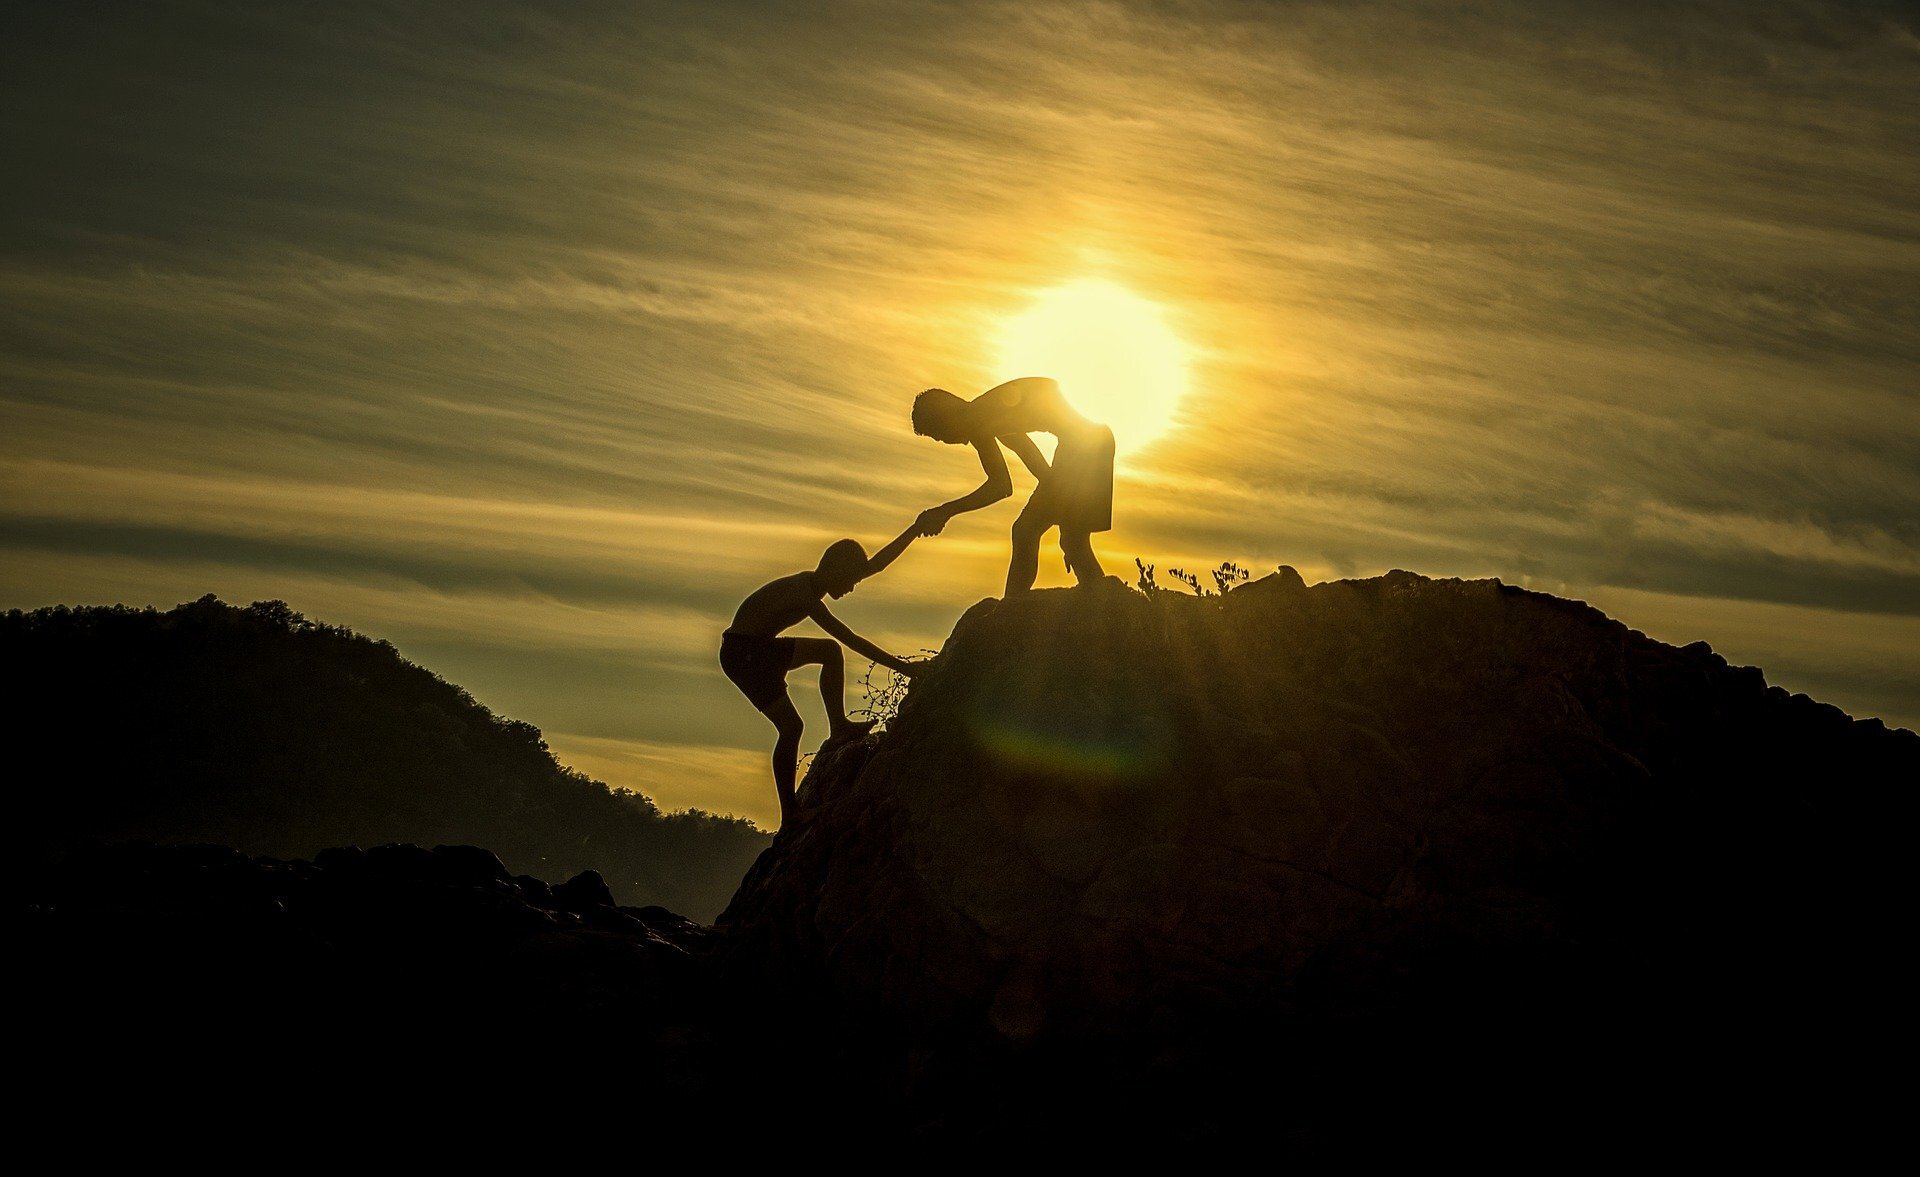 A person helps another person climb up a hill, silhouetted against the setting sun